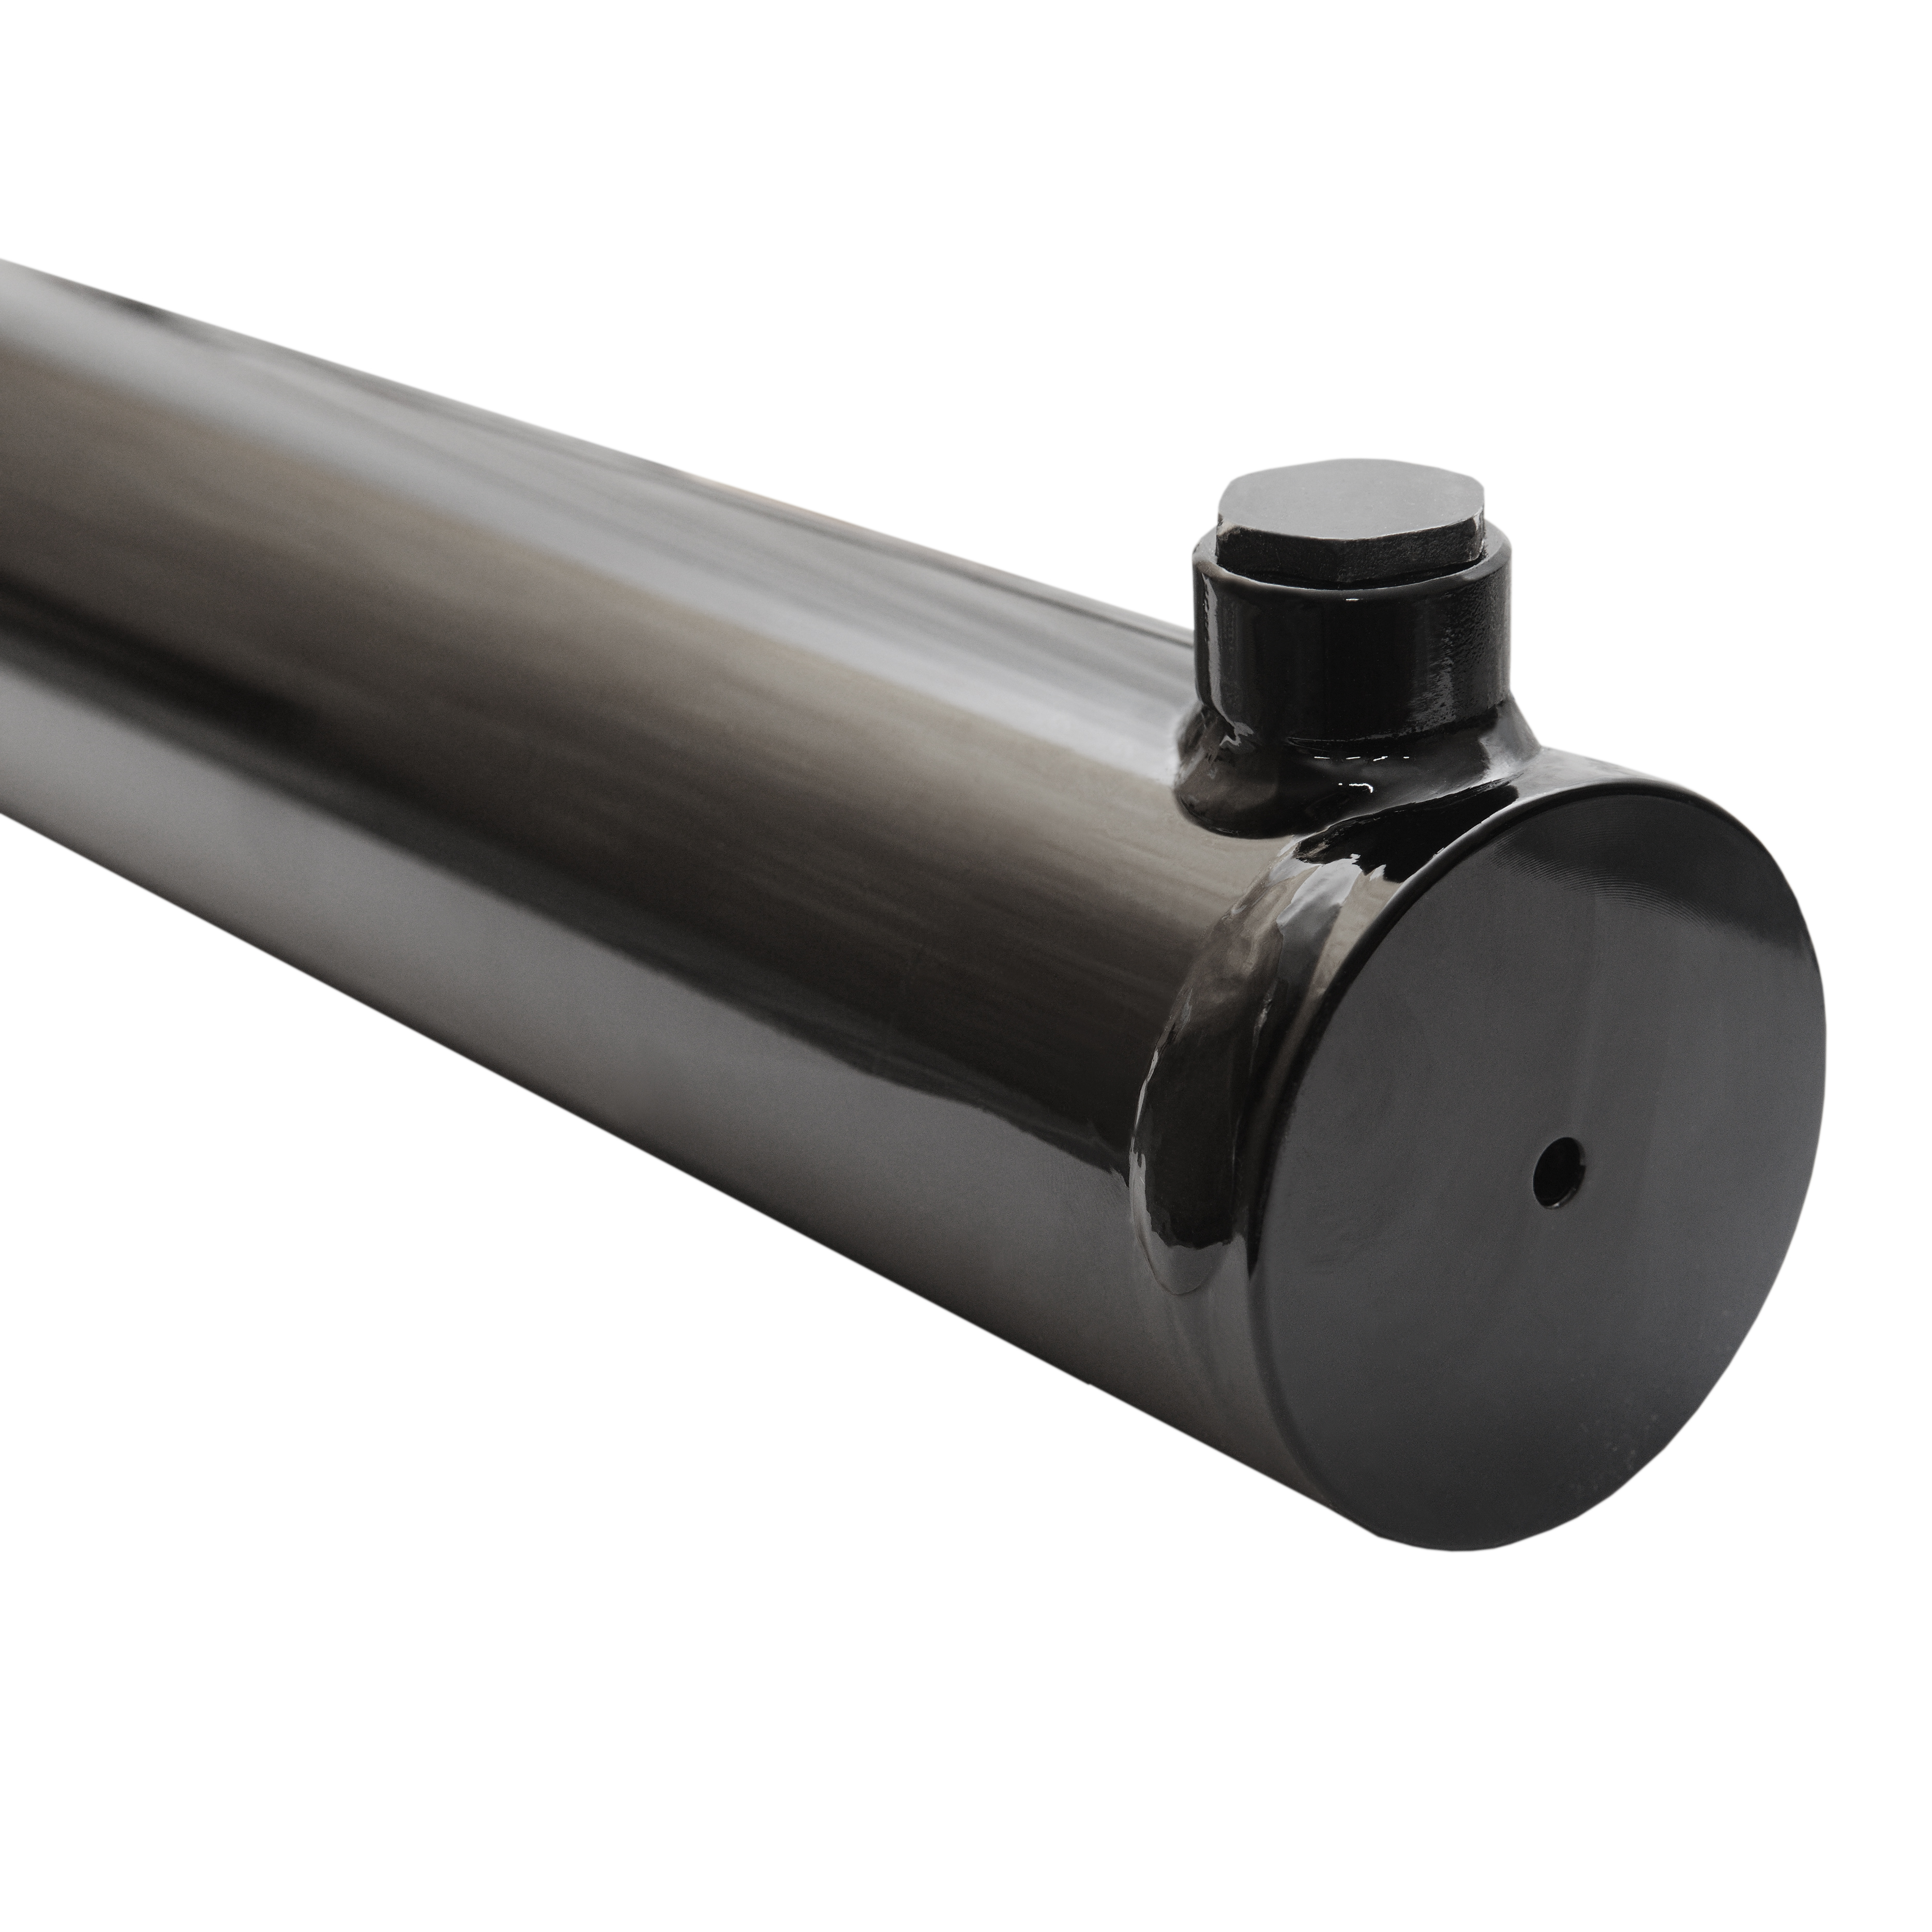 2.5 bore x 21 stroke hydraulic cylinder, welded universal double acting cylinder | Magister Hydraulics